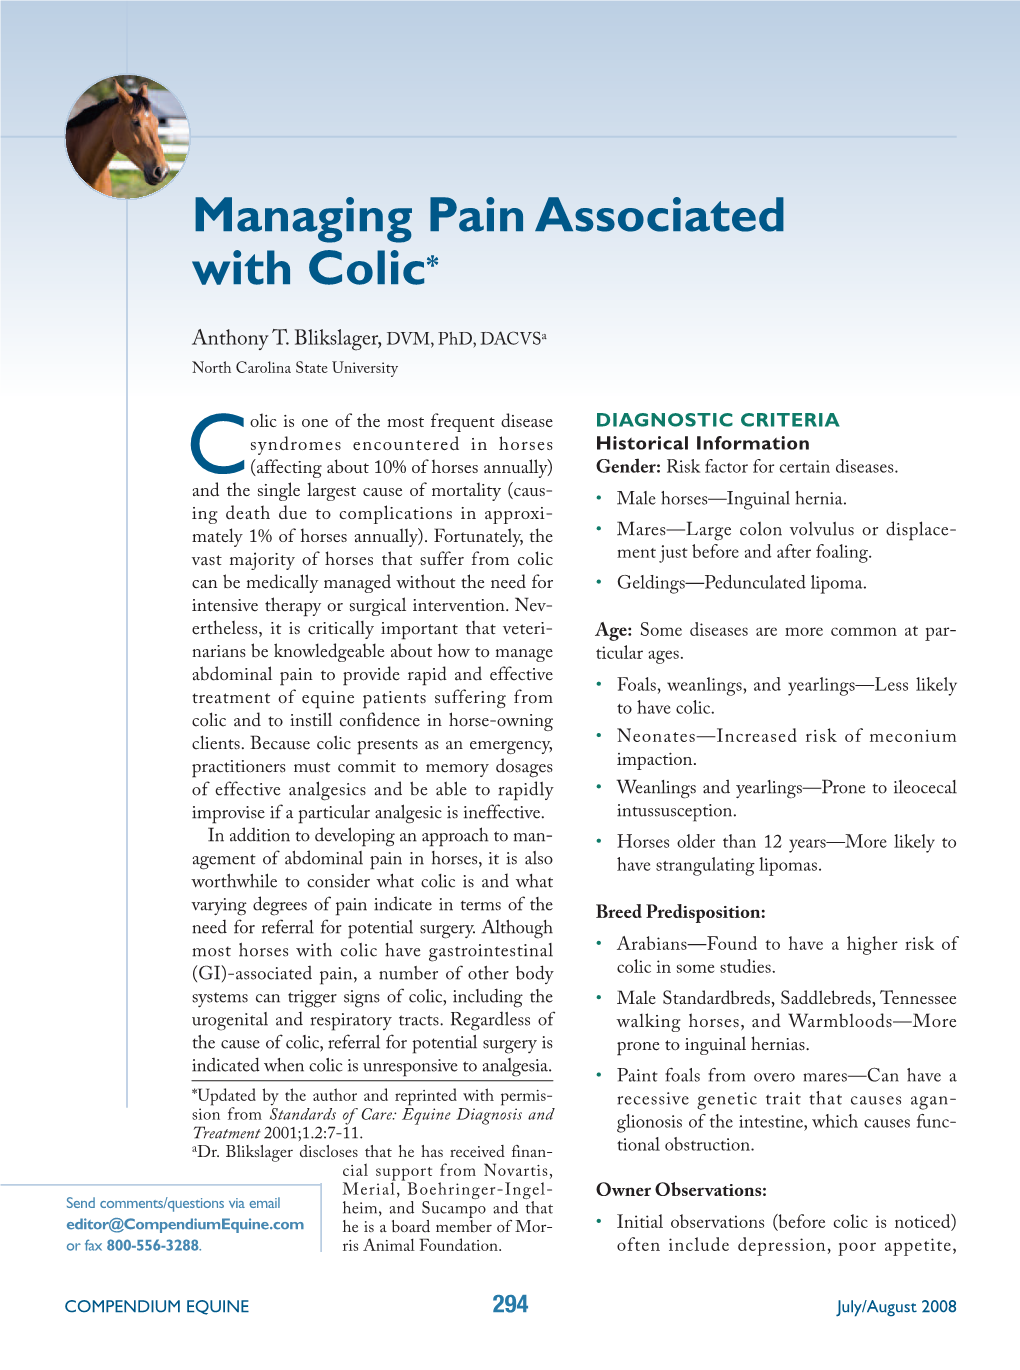 Managing Pain Associated with Colic*